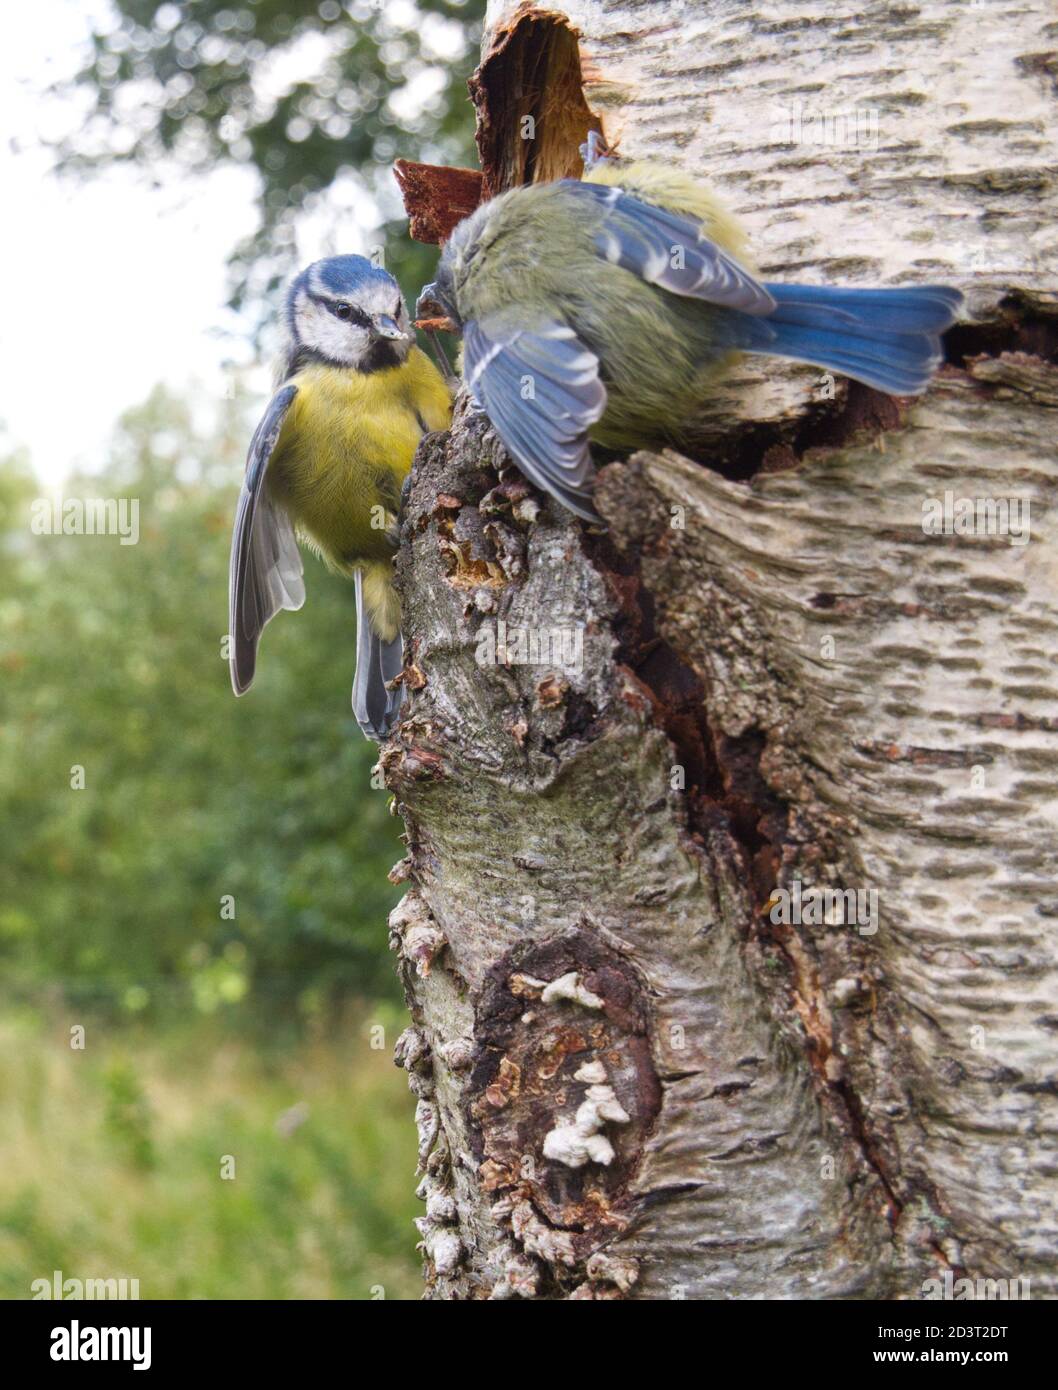 Blue Tit ( Cyanistes caeruleus ) wide angle image showing two birds fighting in environment. Taken with remote control camera trap in Wales 2020. Stock Photo